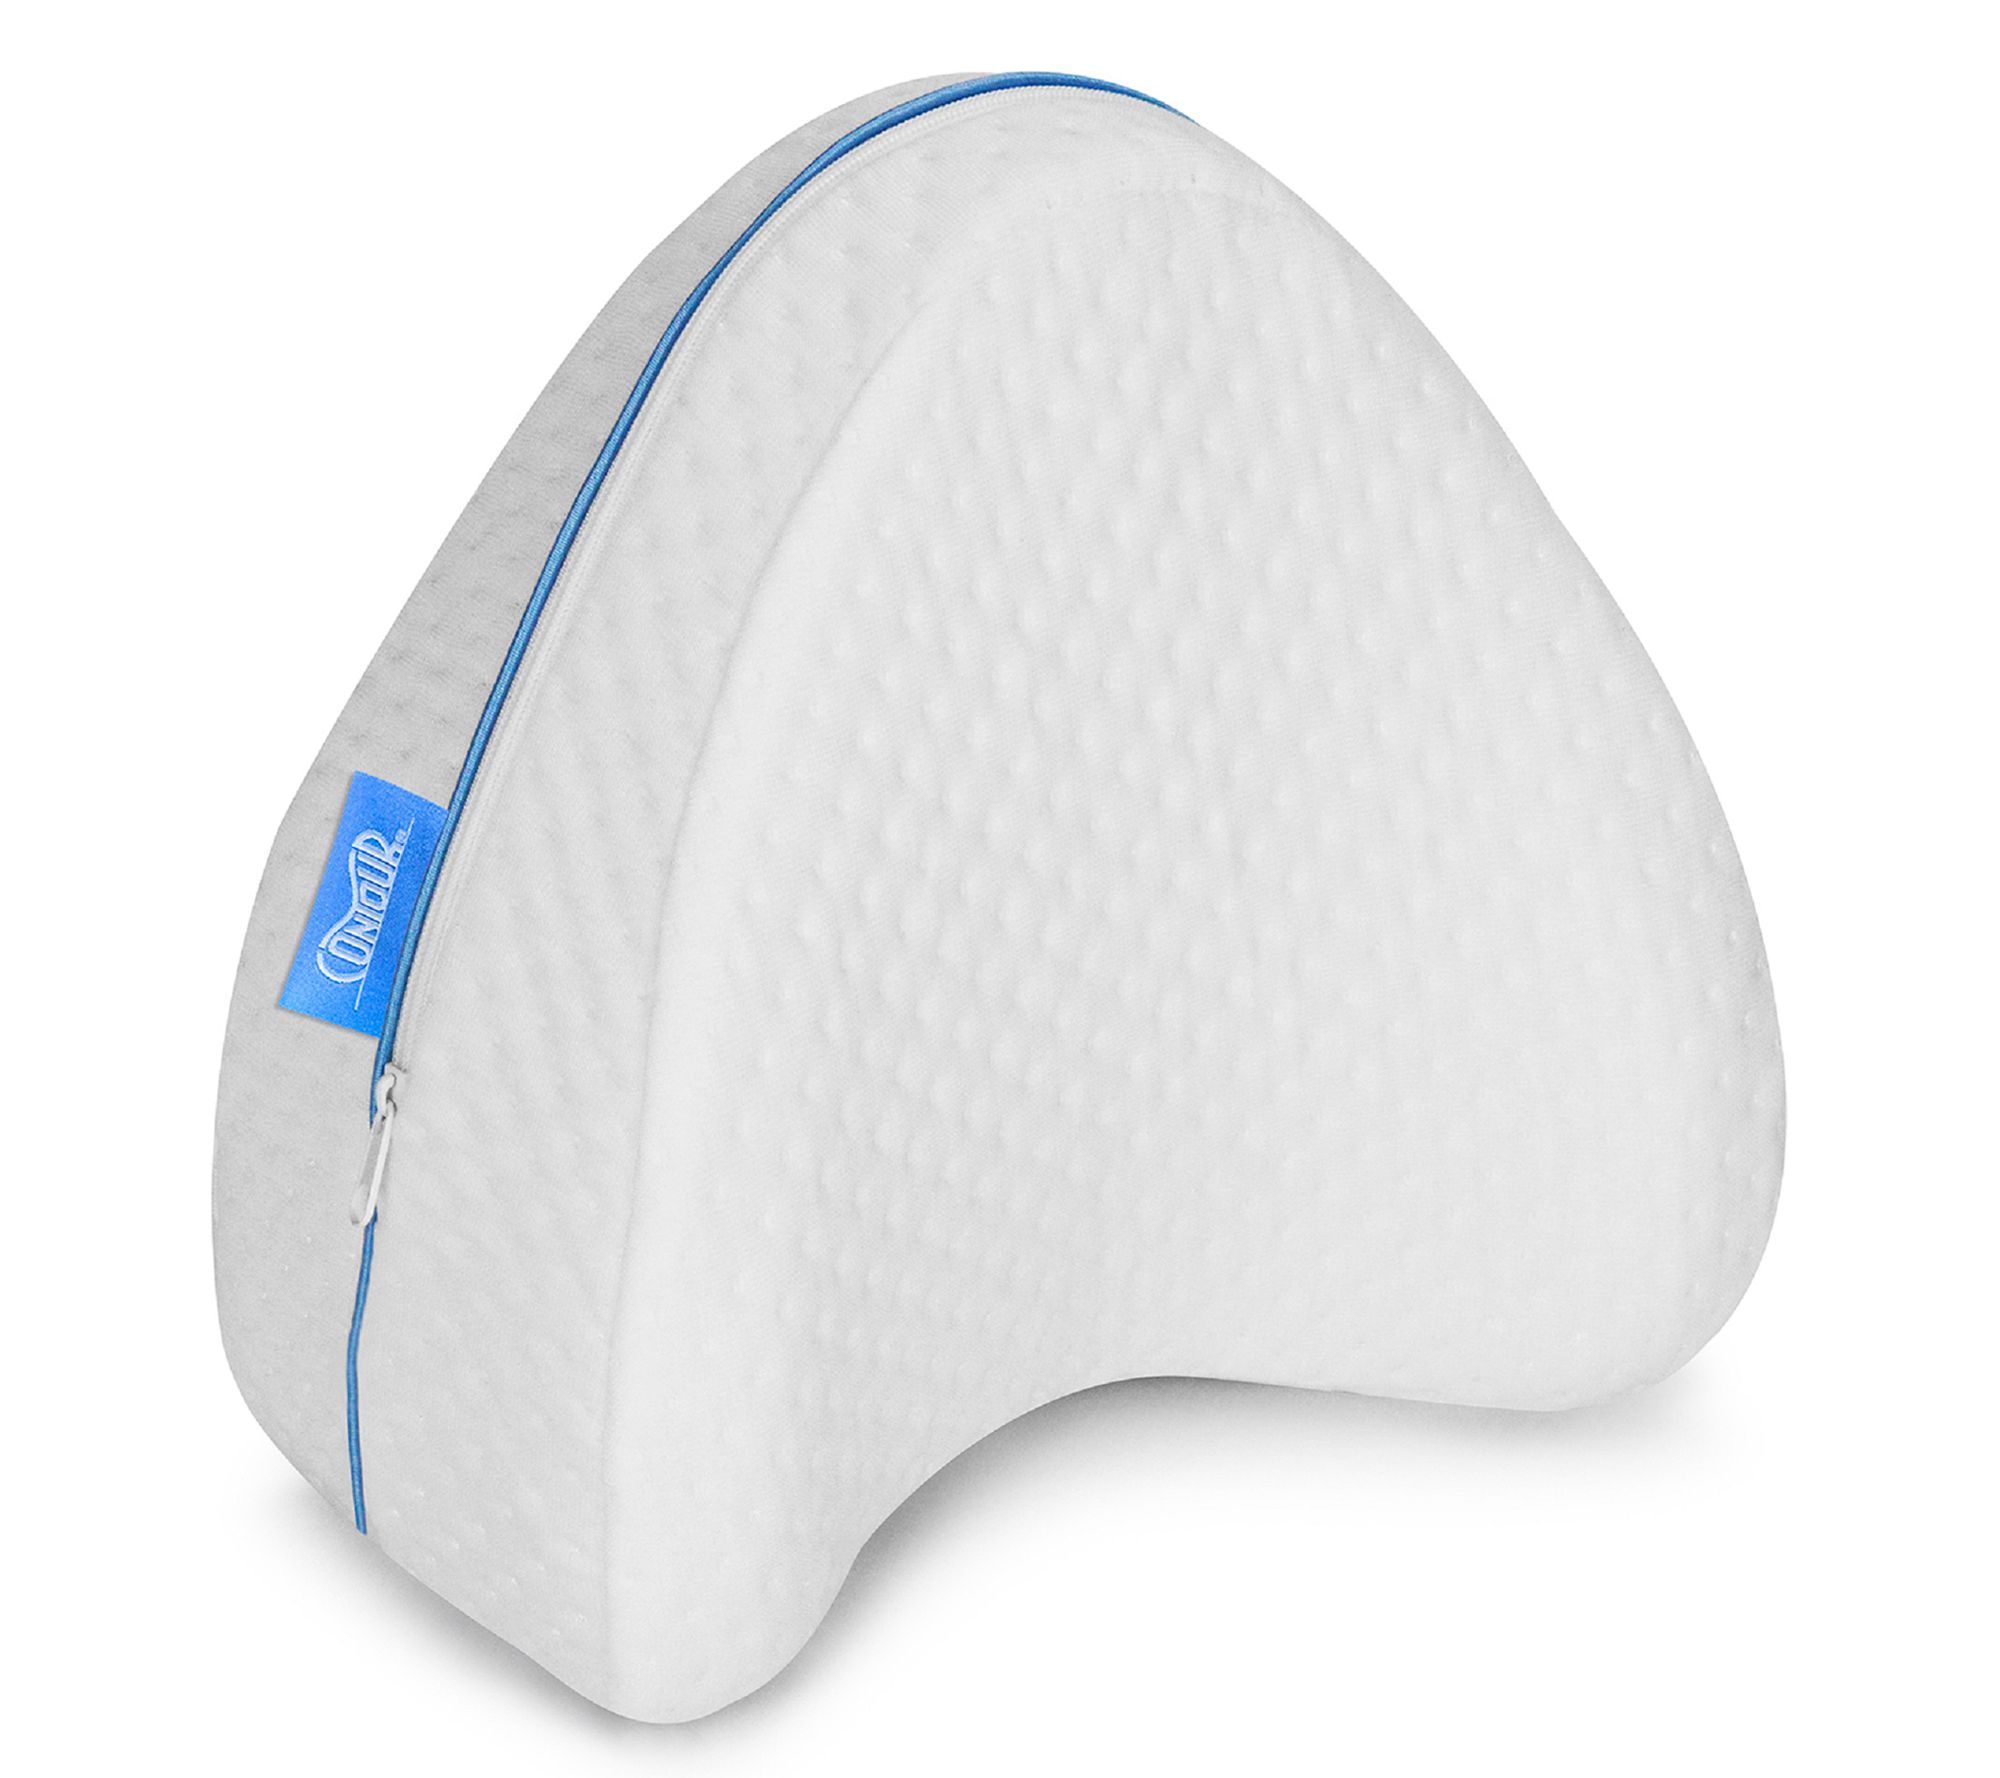 Legacy Leg Pillow by Contour Products